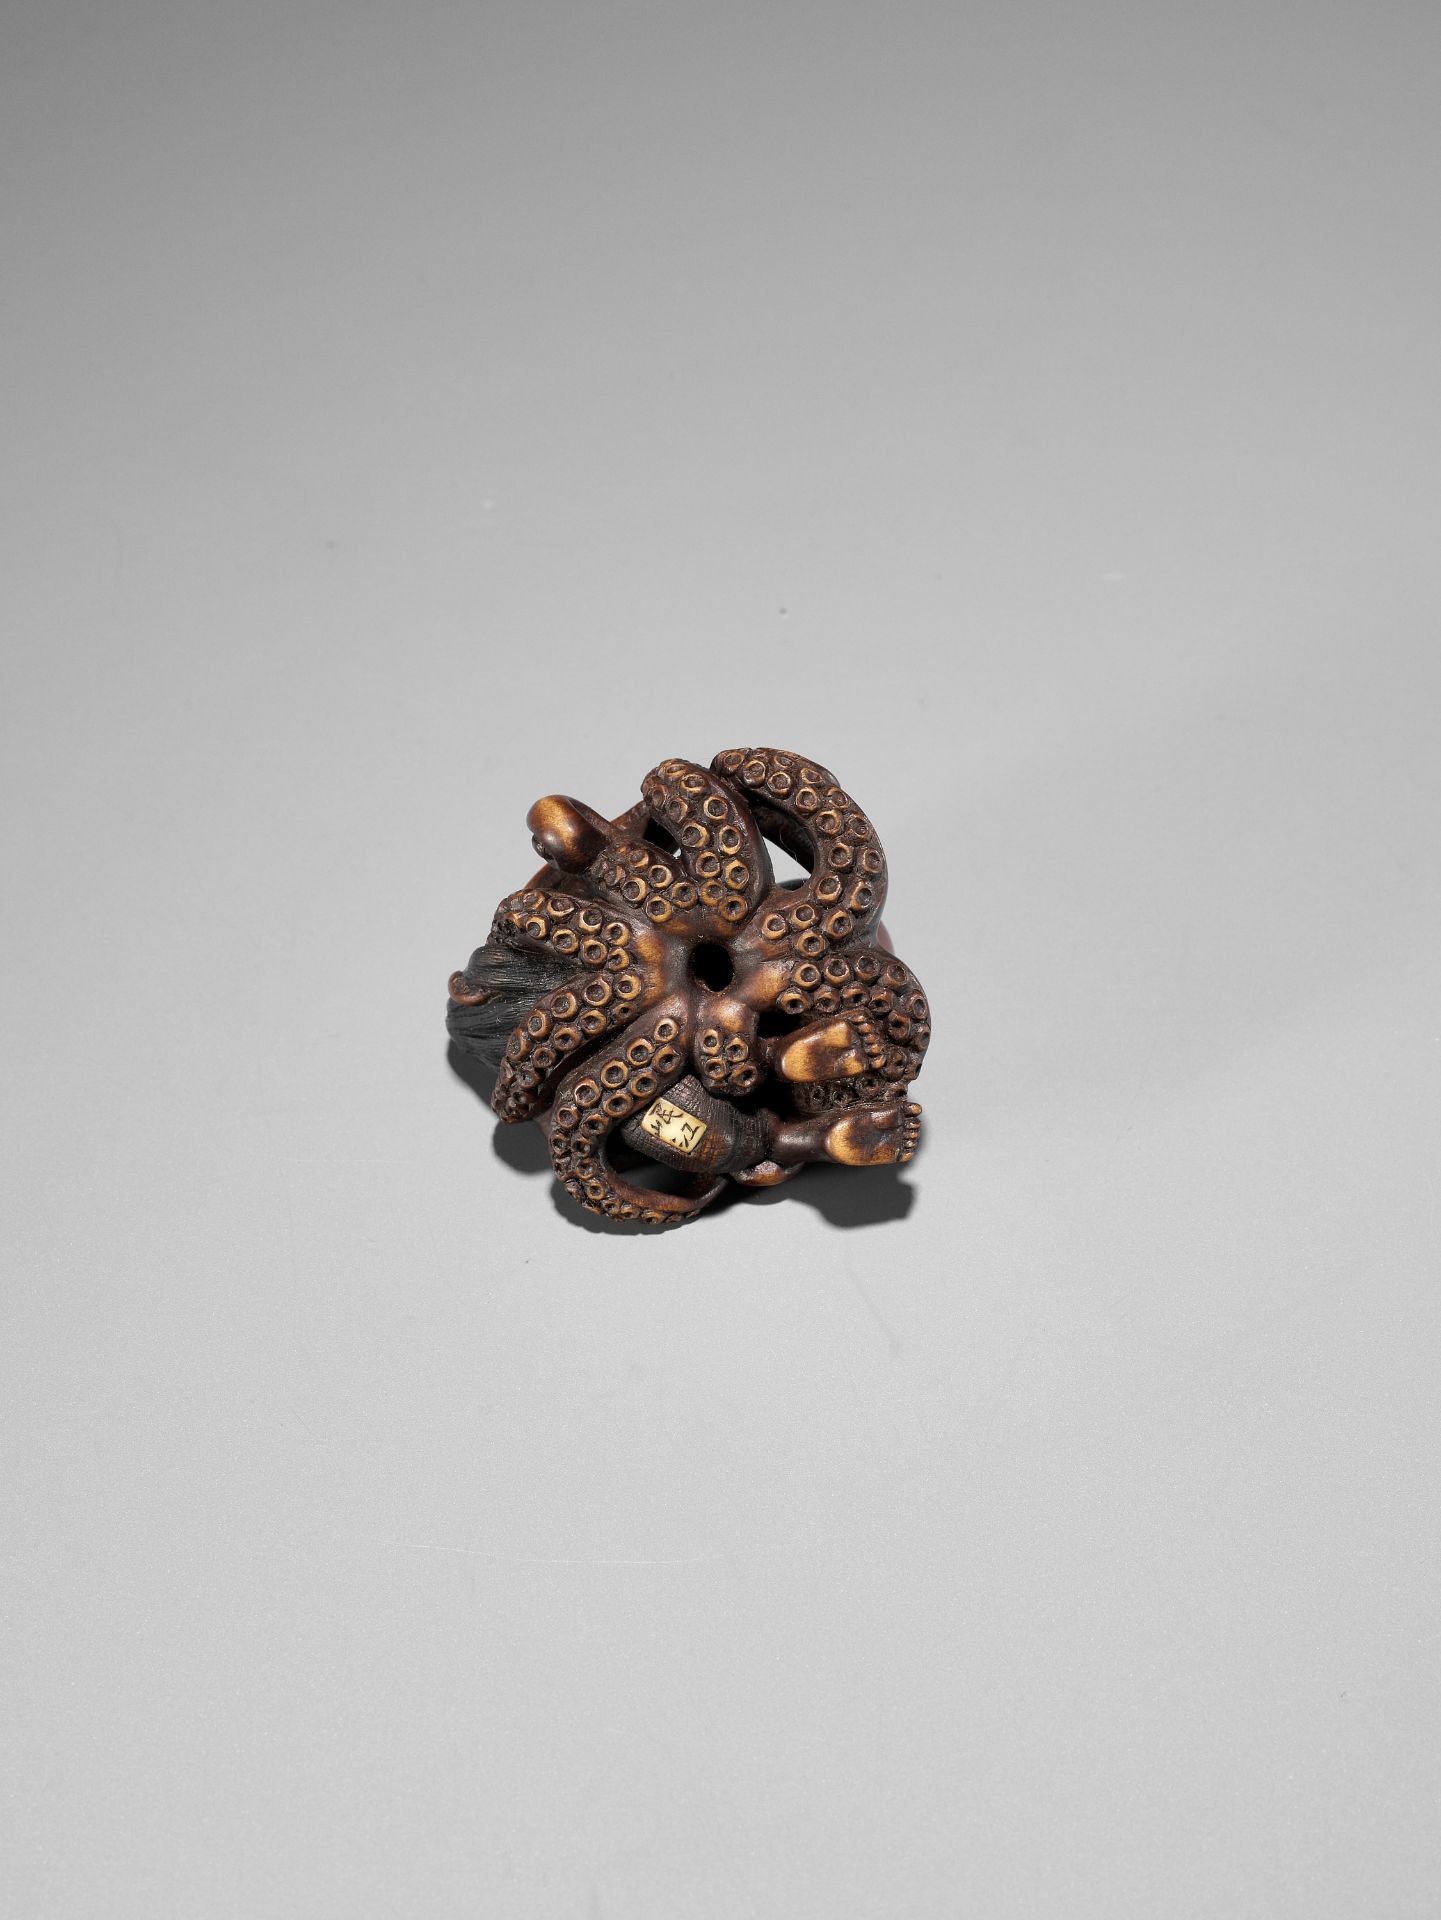 A SUPERB WOOD NETSUKE OF AN AMA STRUGGLING WITH AN OCTOPUS, ATTRIBUTED TO IKKYU - Image 10 of 16